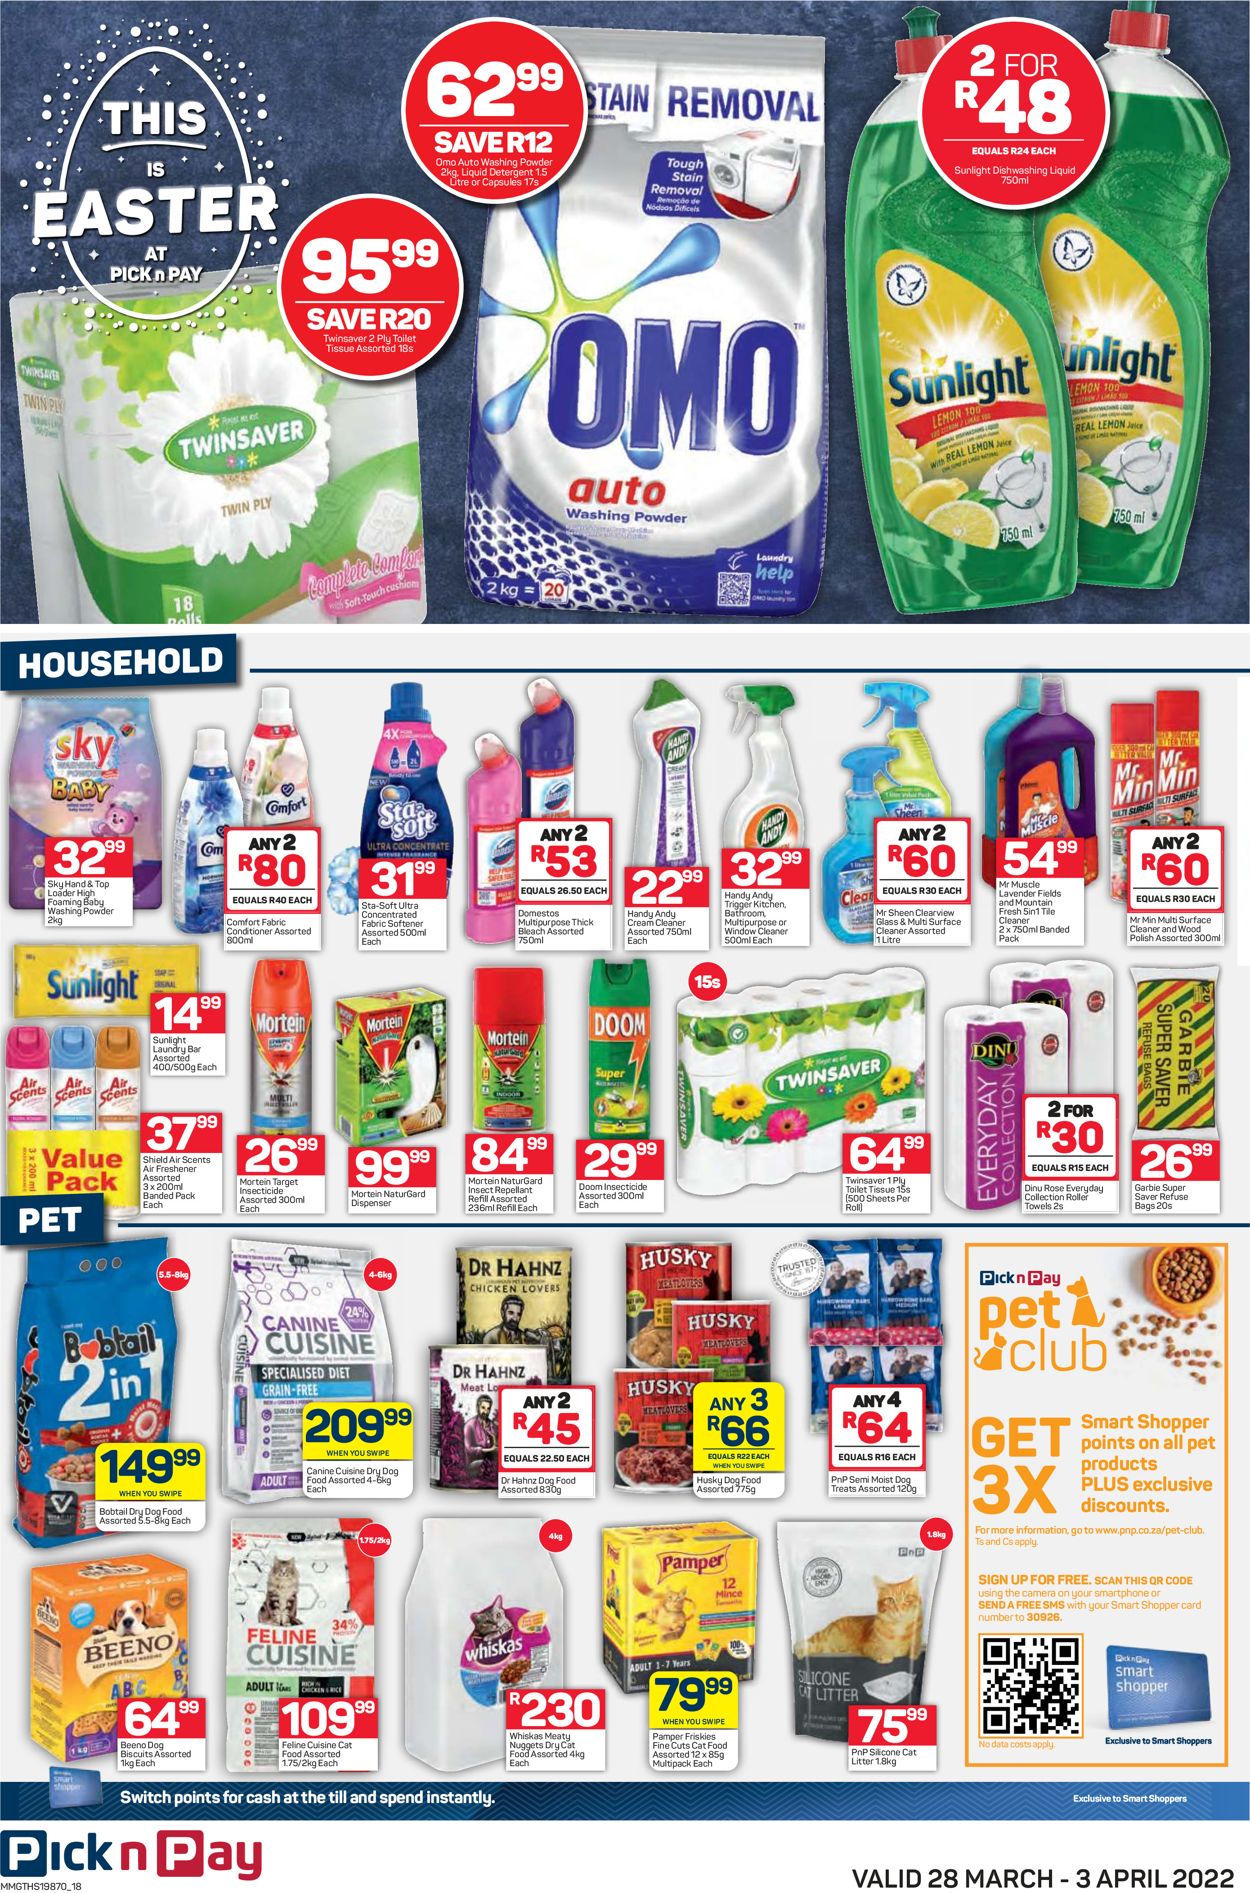 Pick n Pay EASTER 2022 Catalogue - 2022/03/28-2022/04/03 (Page 18)